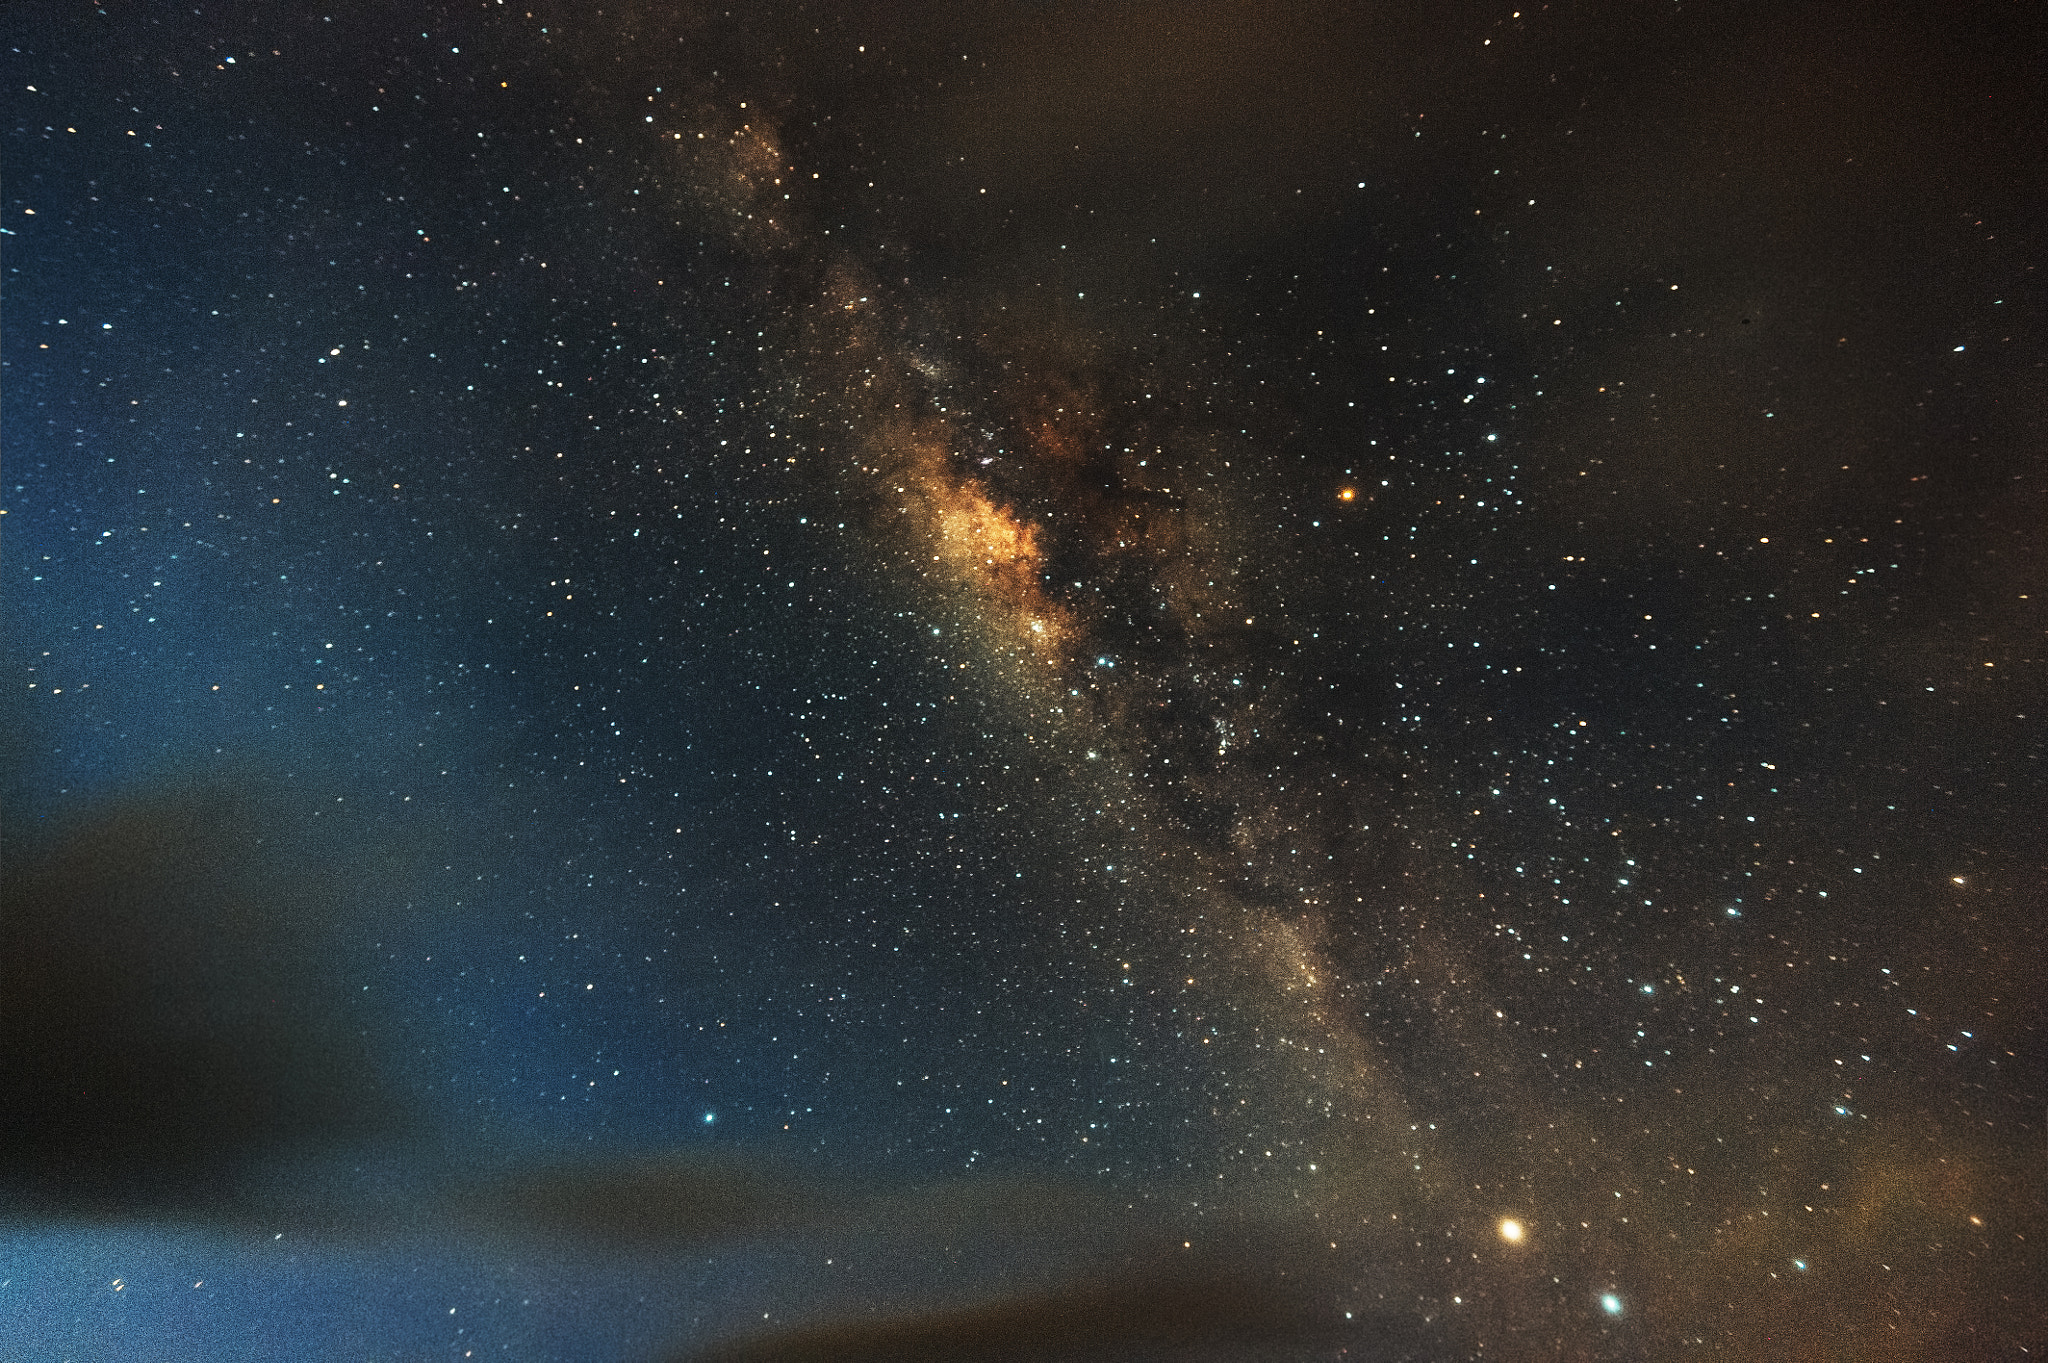 The Milky Way. Our galaxy. Long exposure photograph from indones